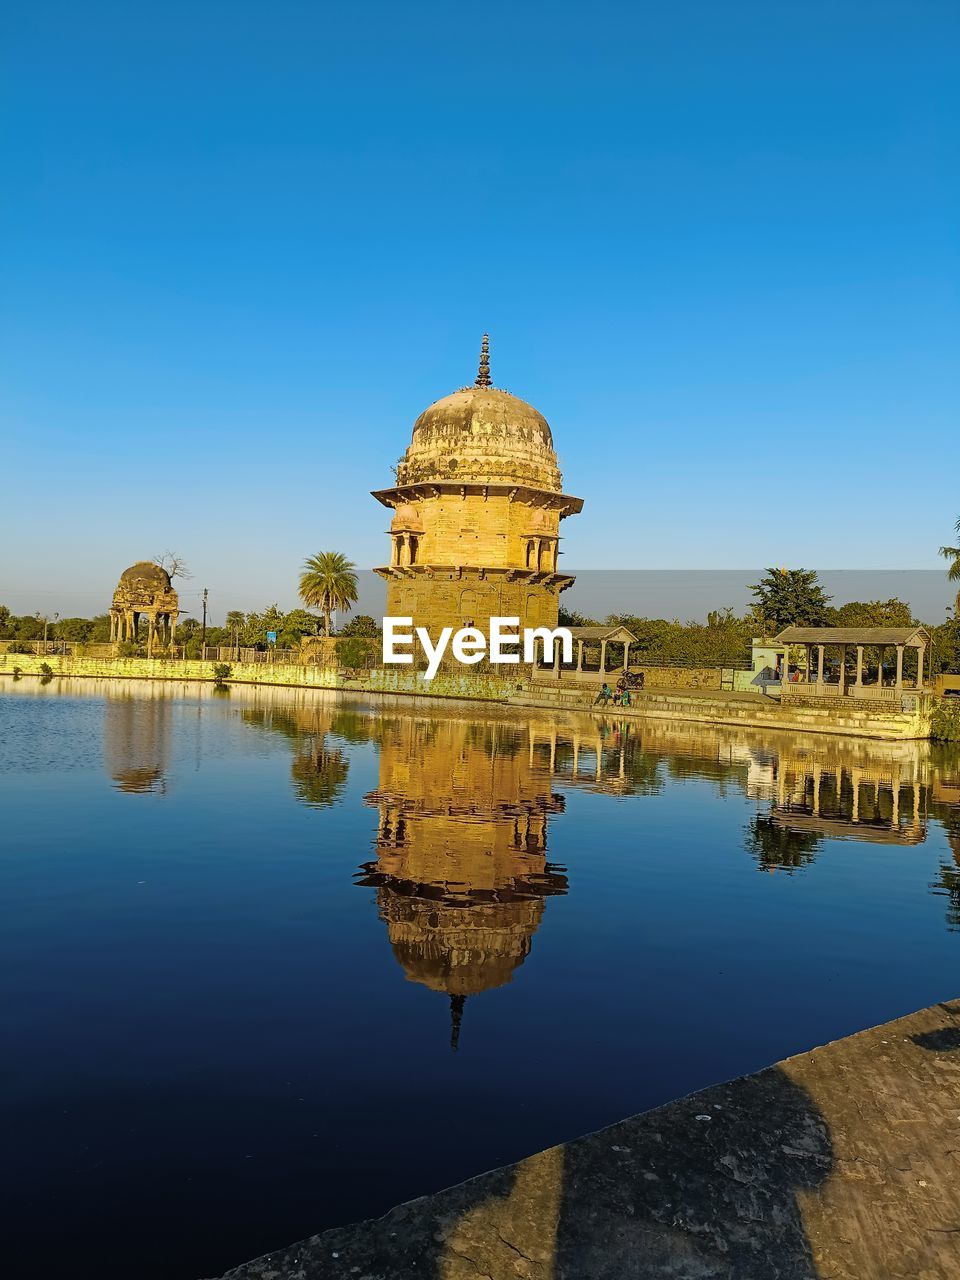 reflection, architecture, water, built structure, travel destinations, sky, building exterior, nature, blue, travel, history, religion, clear sky, the past, landmark, dome, city, lake, building, tourism, no people, belief, evening, dusk, outdoors, place of worship, sunny, day, temple - building, horizon, ancient, spirituality, tower